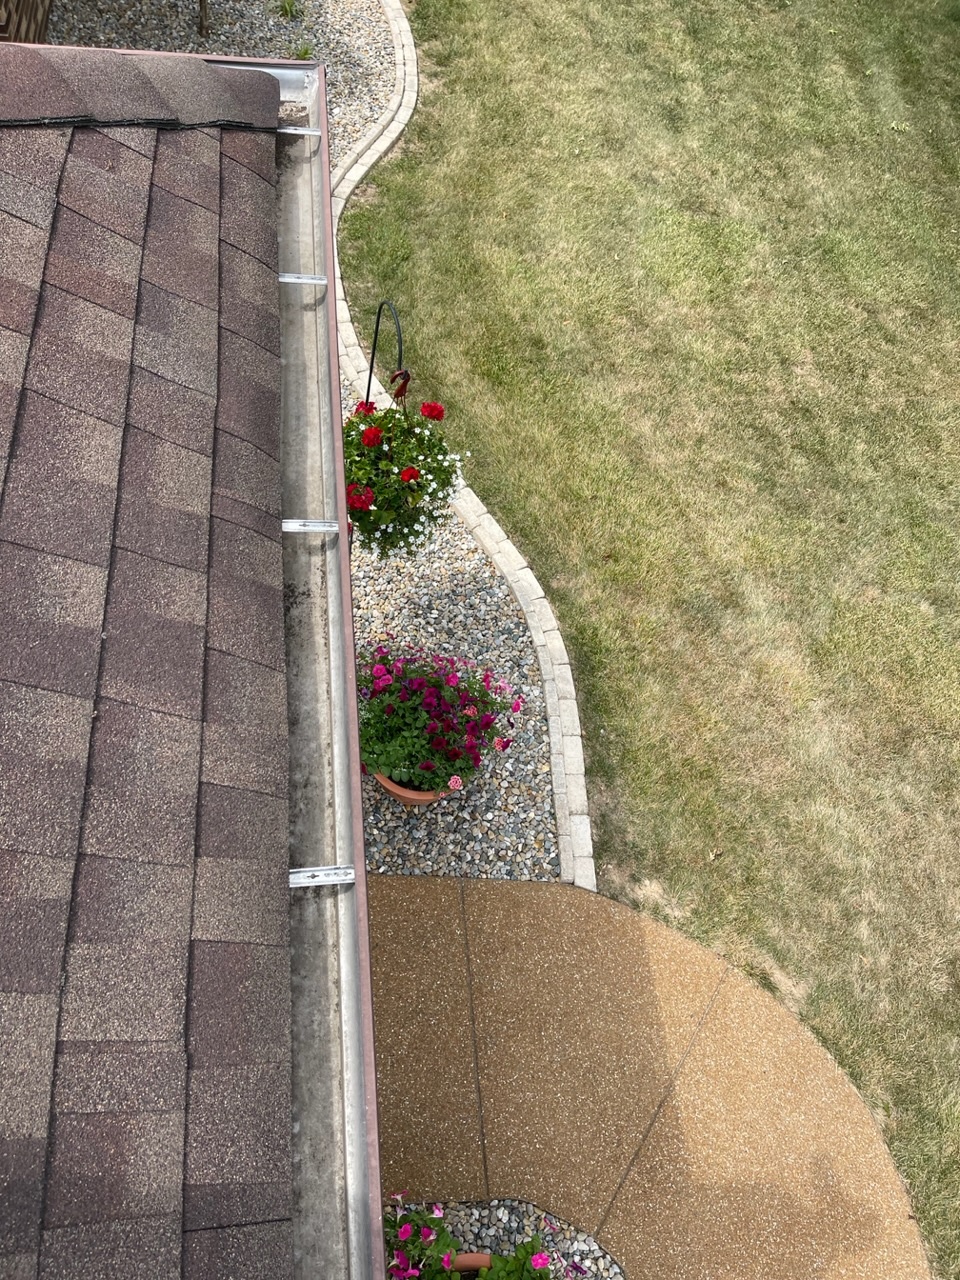 Gutter Cleaning Service in Fresno for Richard's home